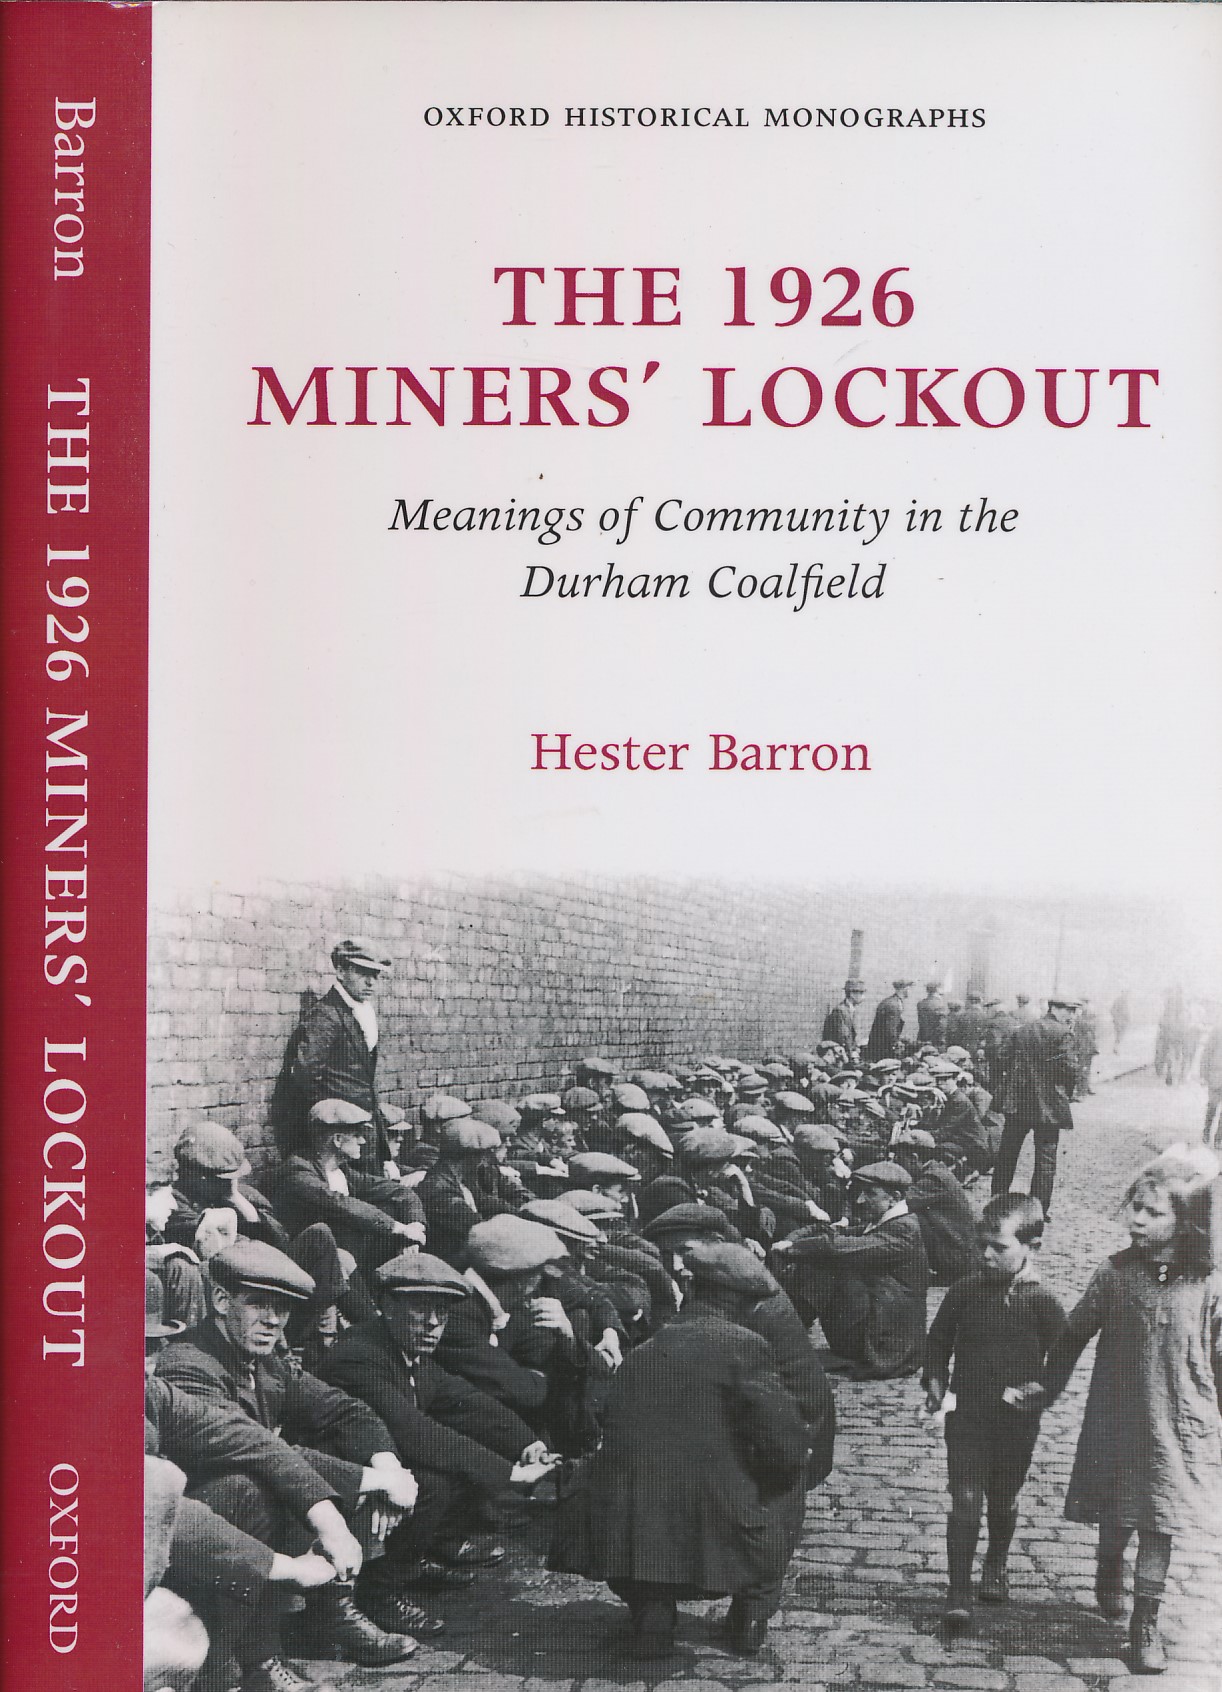 The 1926 Miners' Lockout. Meanings of Community in the Durham Coalfield. Oxford Historical Monographs